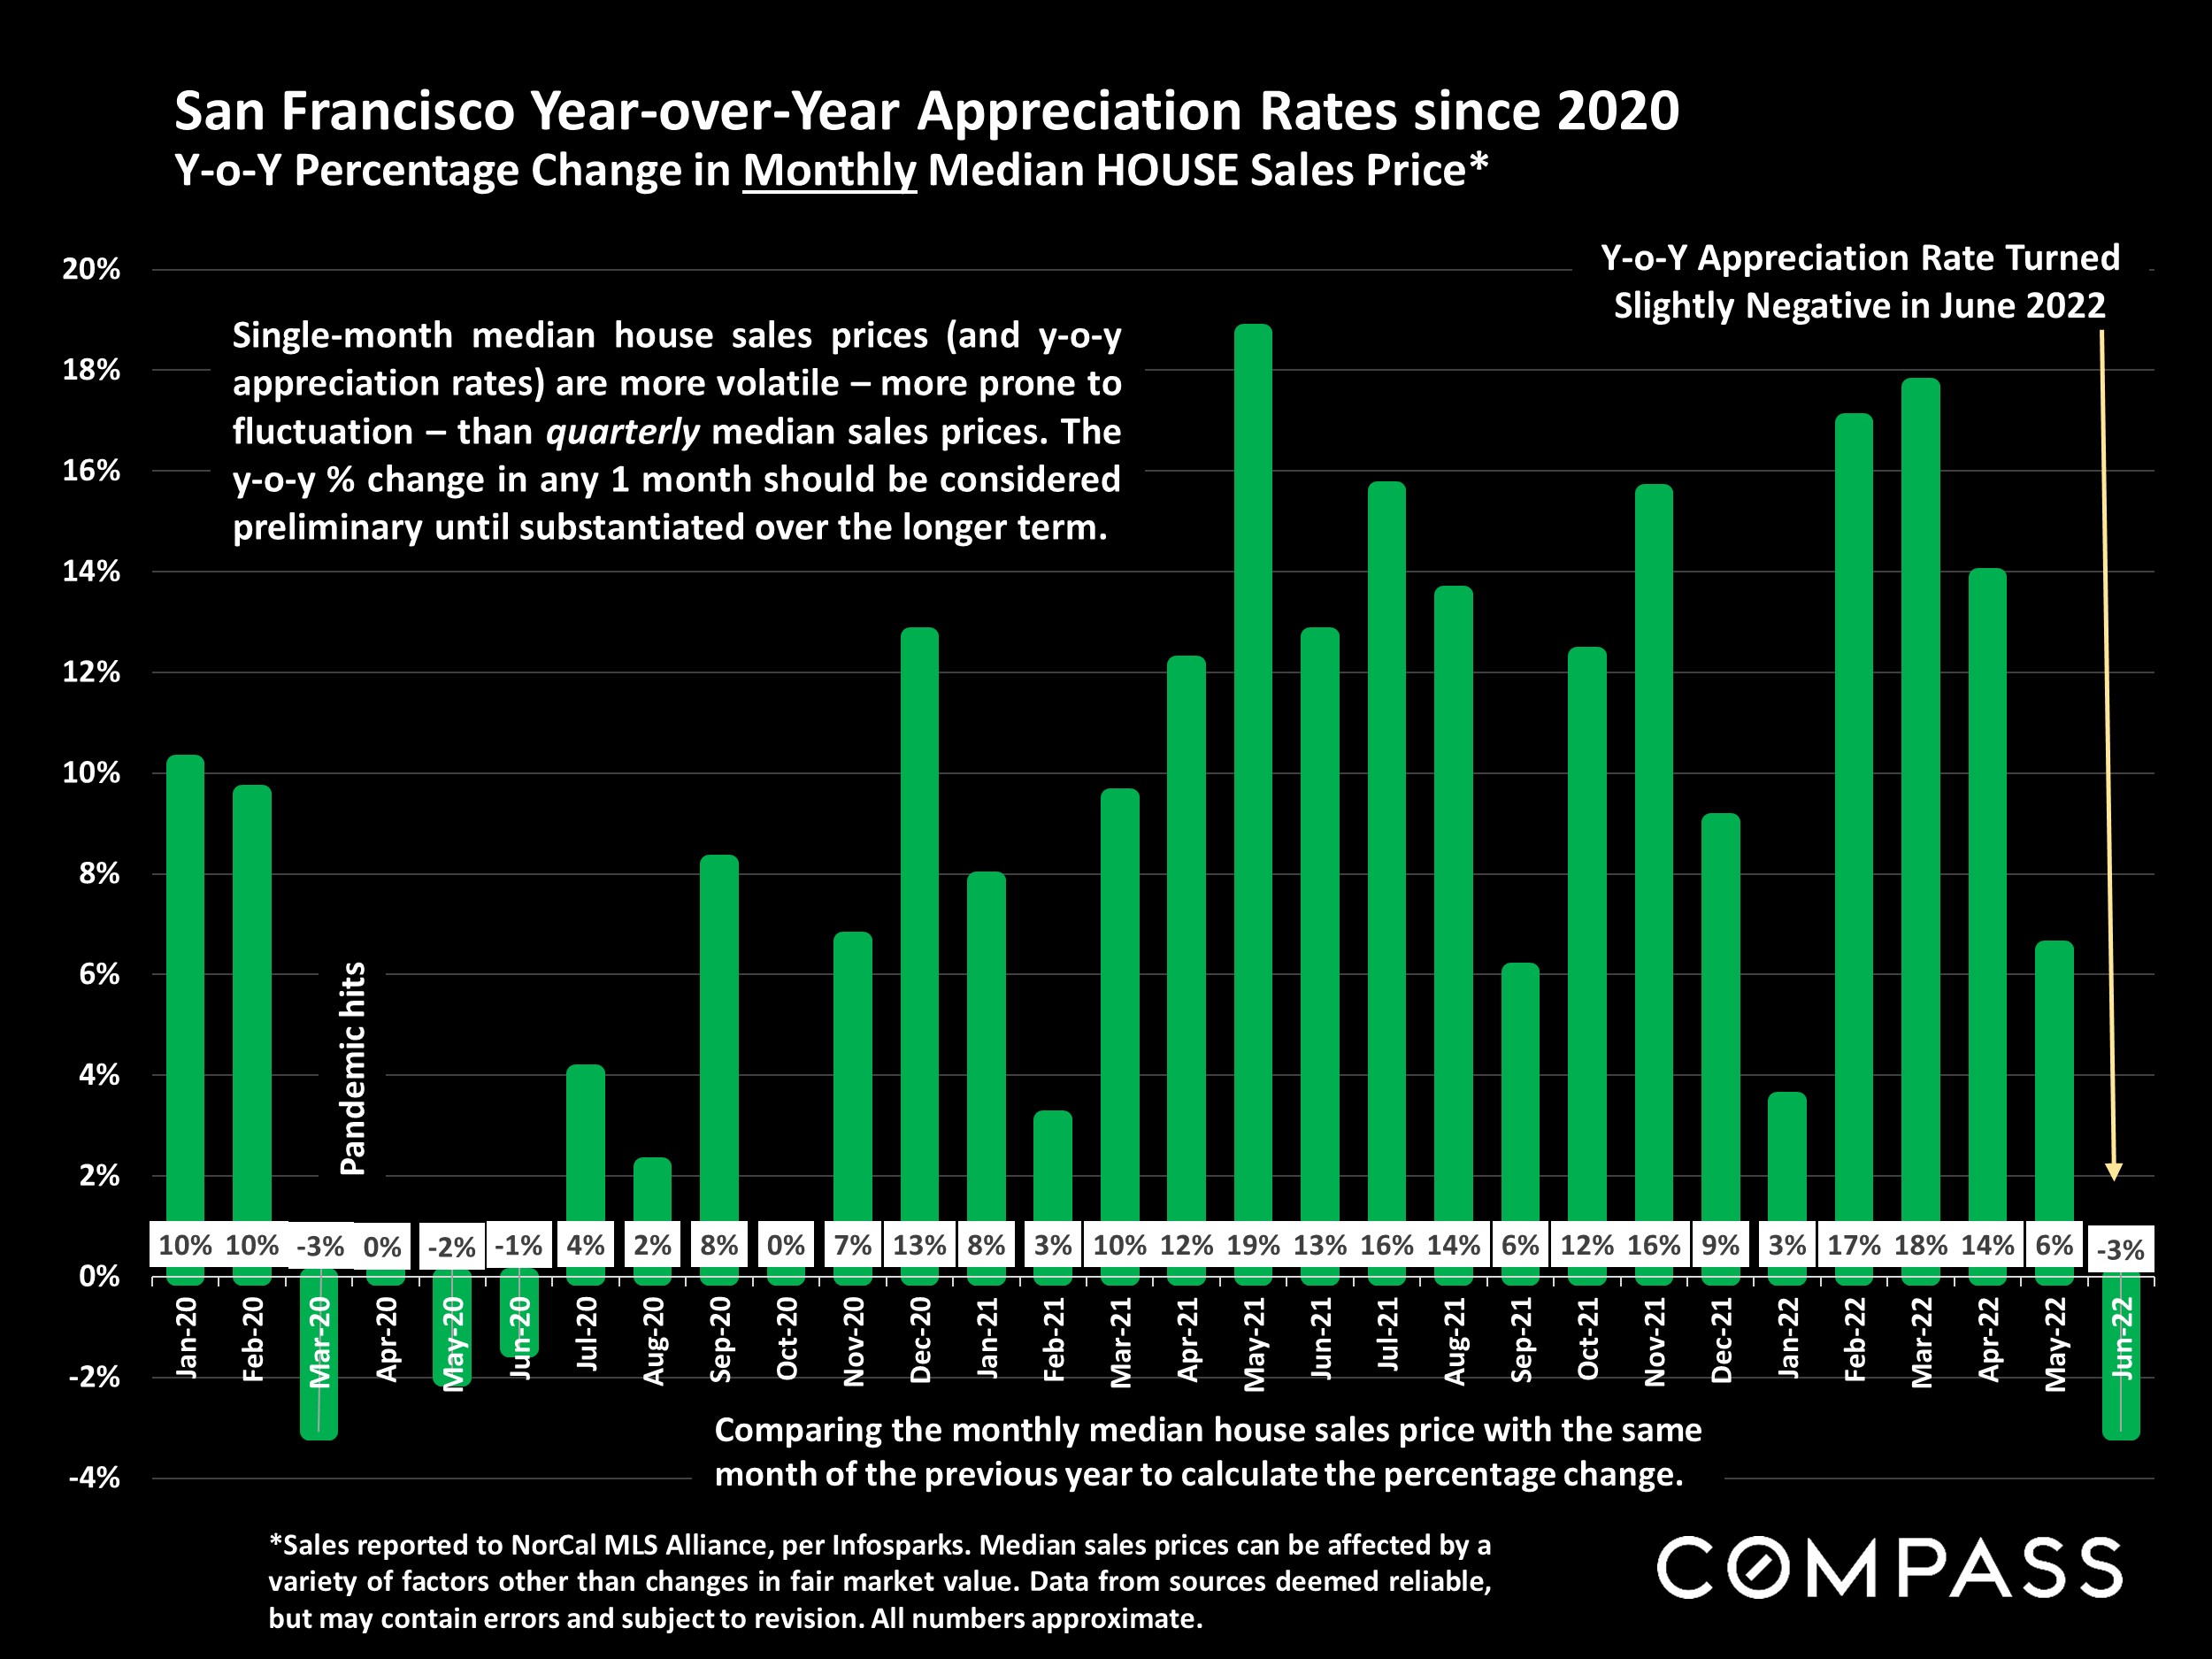 Slide showing the San Francisco year-over-year appreciation rates since 2020